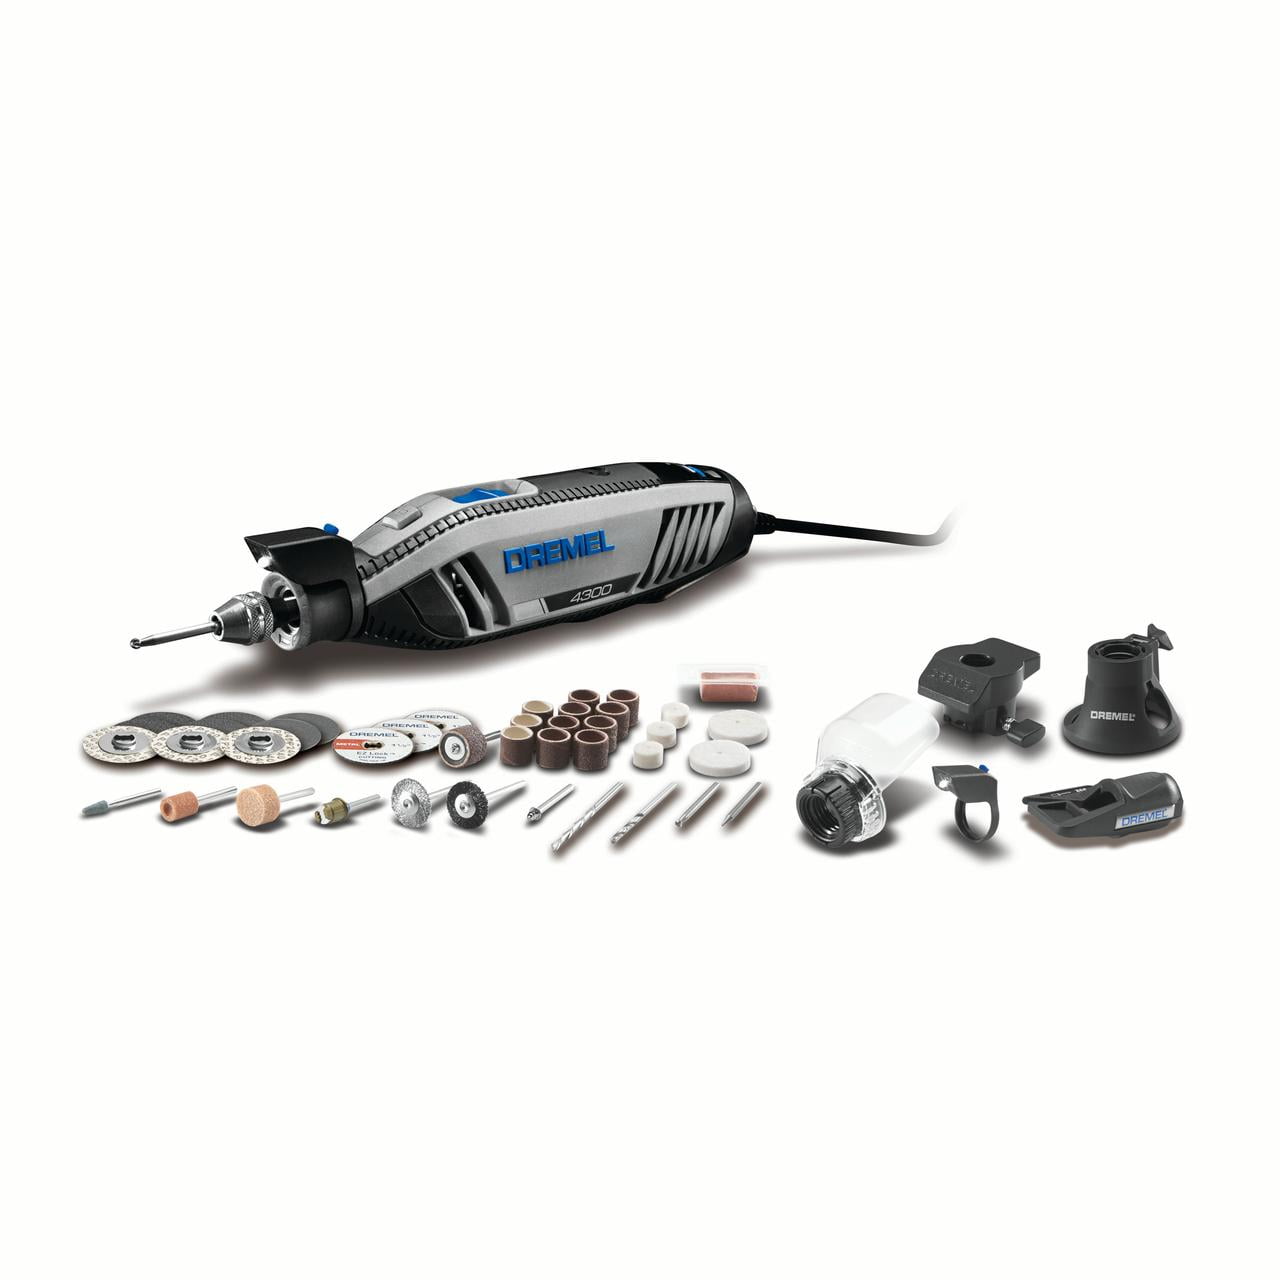 Award Winning Dremel 2050-11 Stylo+ Versatile Craft & Hobby Tool with 11  Accessories, Perfect for Glass Etching, Leather Burnishing, Jewelry Making